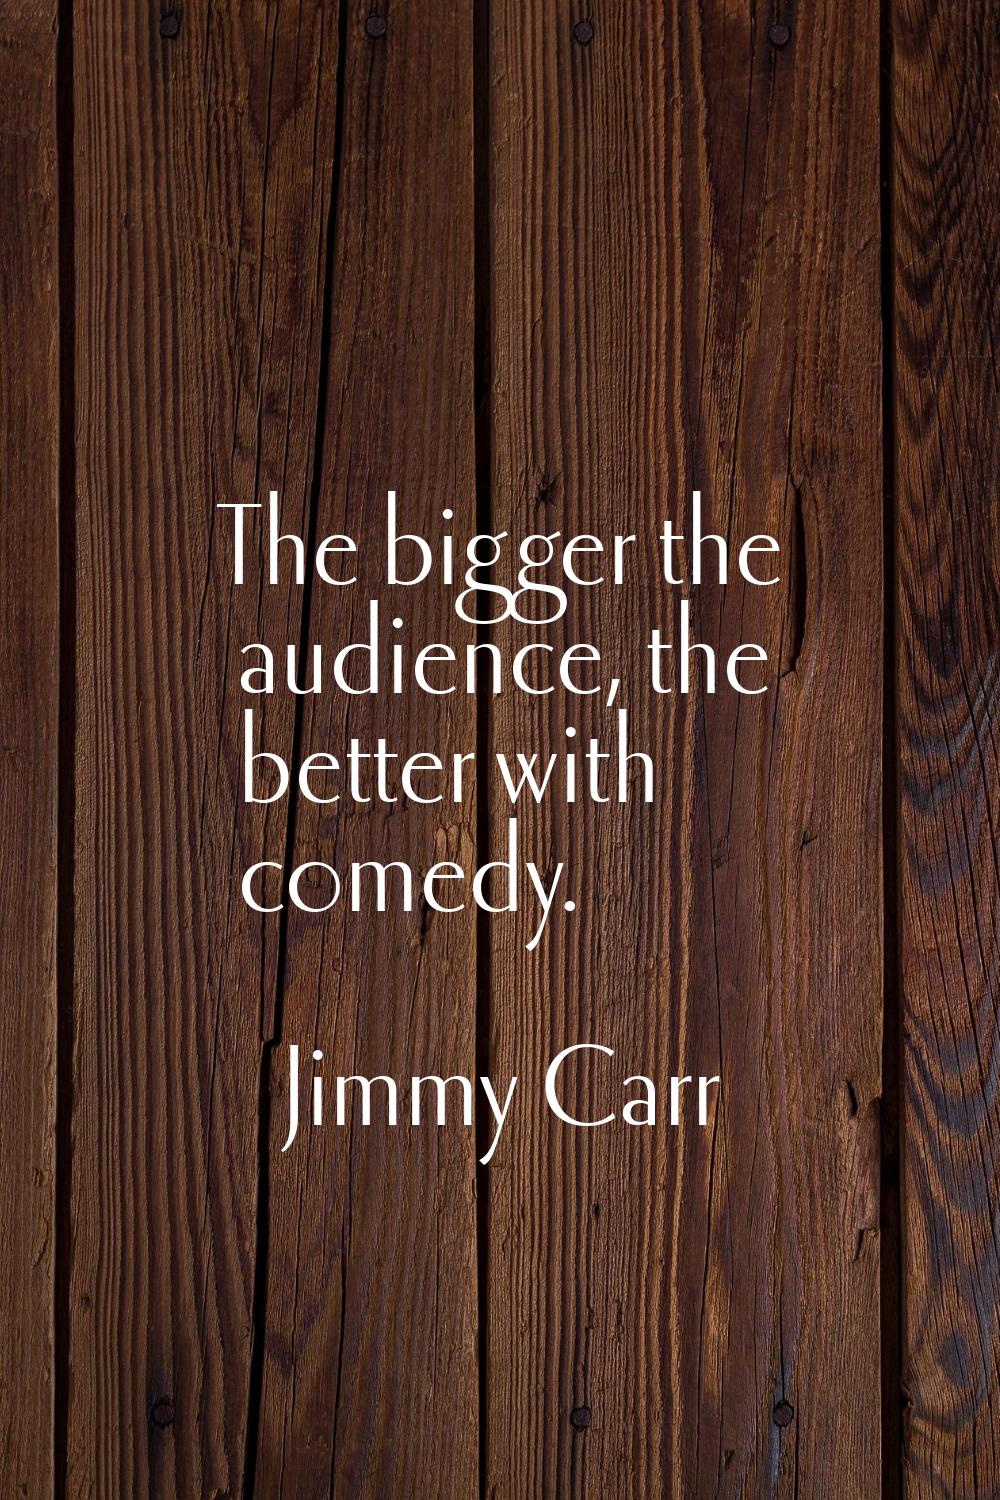 The bigger the audience, the better with comedy.